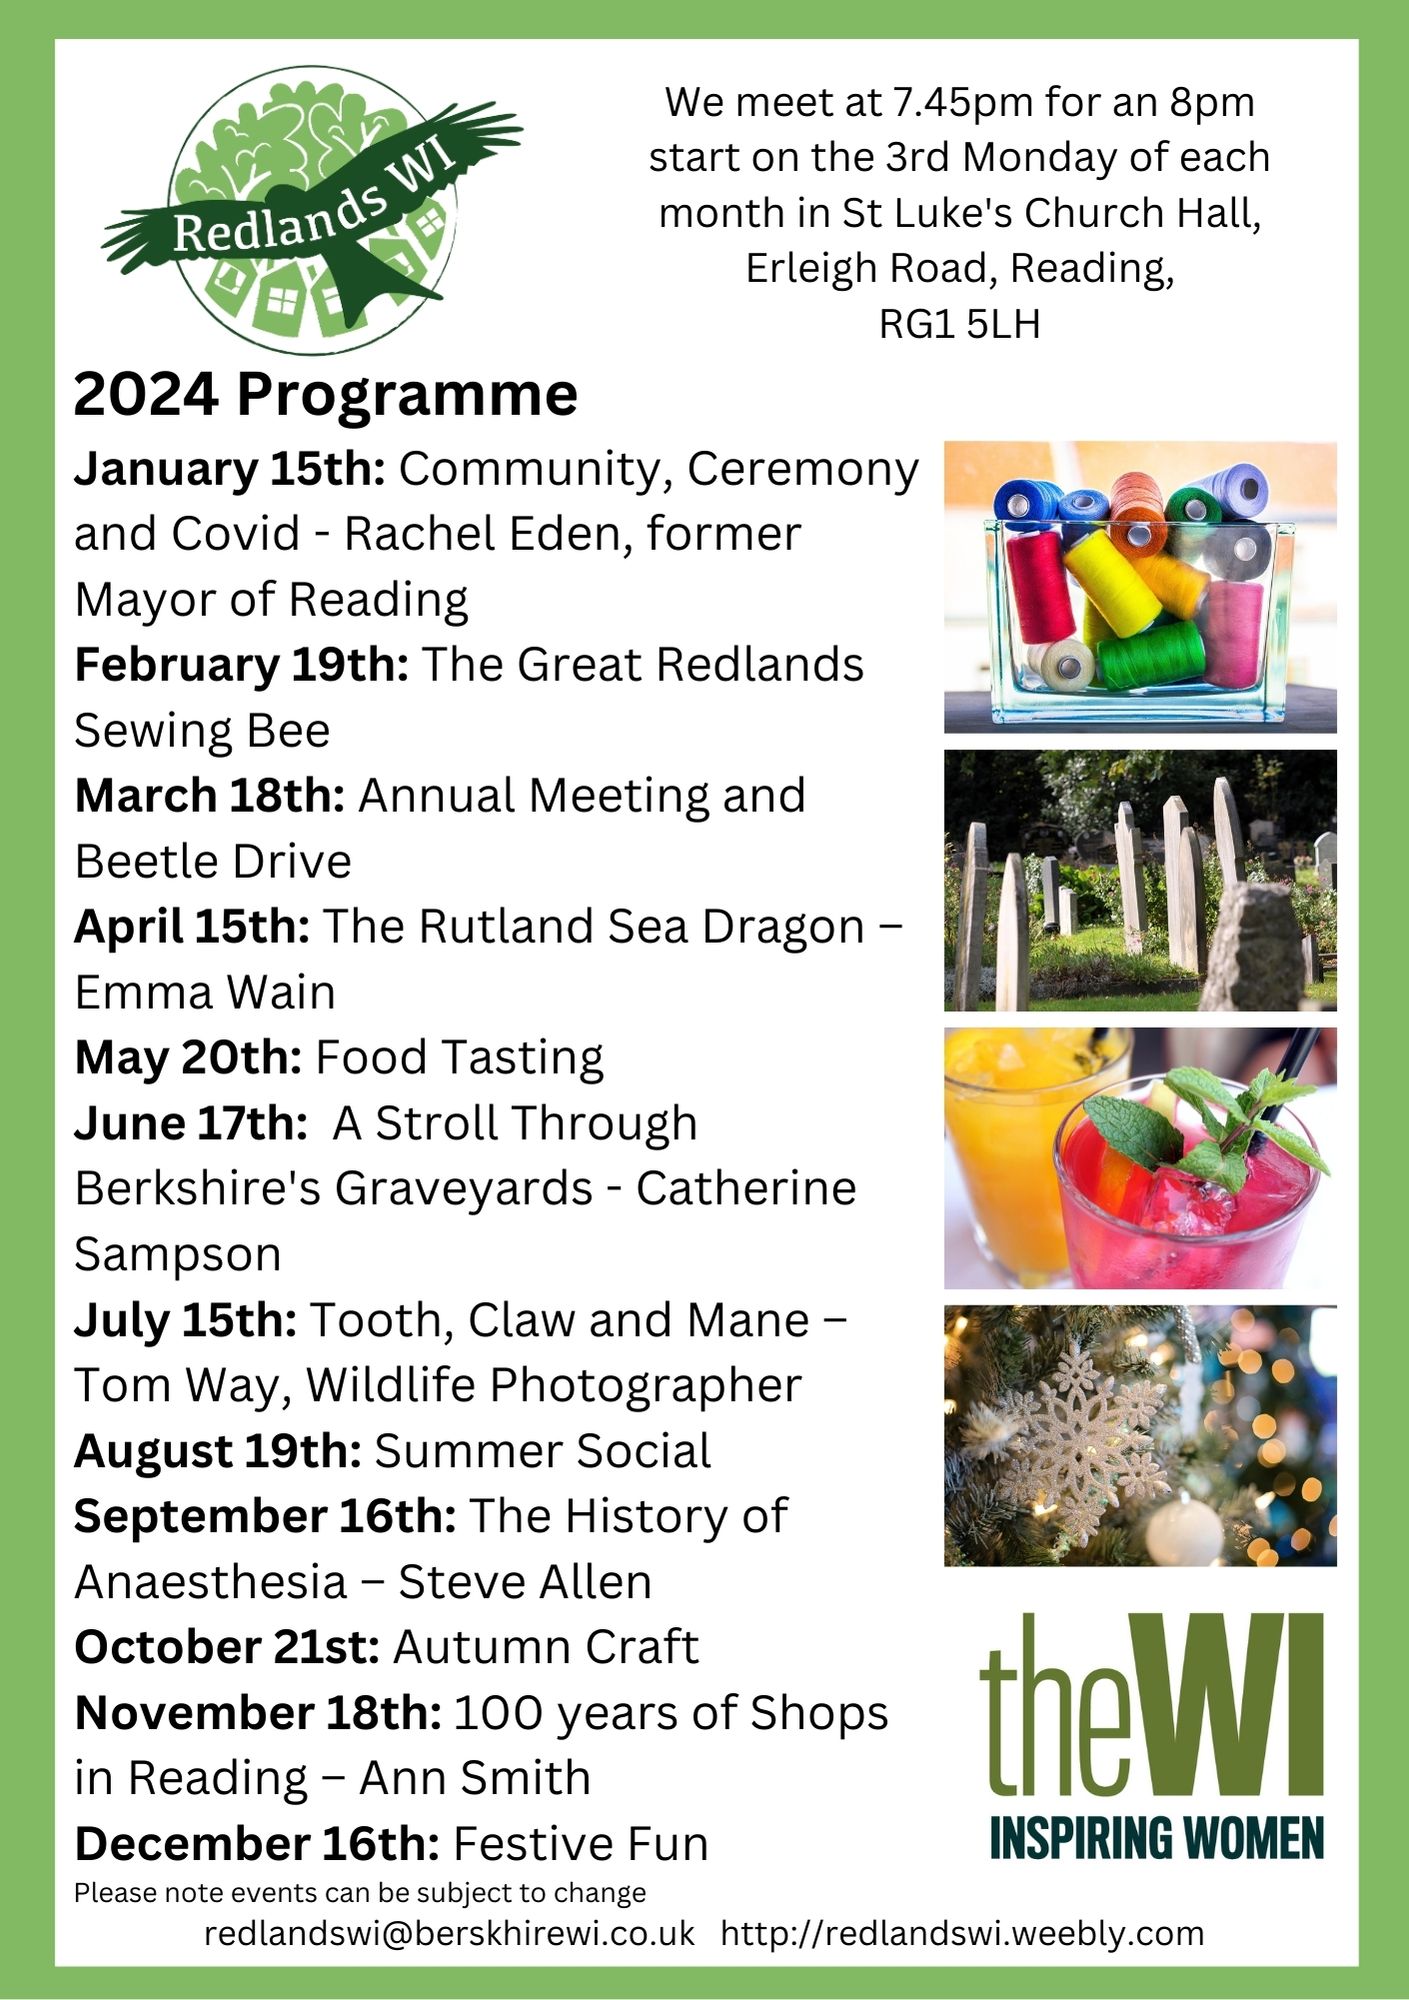 Image shoes the programme of events for 2024. January 15th: Community, Ceremony and Covid - Rachel Eden, former Mayor of Reading February 19th: The Great Redlands Sewing Bee March 18th: Annual Meeting and Beetle Drive April 15th: The Rutland Sea Dragon – Emma Wain May 20th: Food Tasting June 17th:  A Stroll Through Berkshire's Graveyards - Catherine Sampson July 15th: Tooth, Claw and Mane – Tom Way, Wildlife Photographer August 19th: Summer Social September 16th: The History of Anaesthesia – Steve Allen October 21st: Autumn Craft November 18th: 100 years of Shops in Reading – Ann Smith December 16th: Festive Fun 